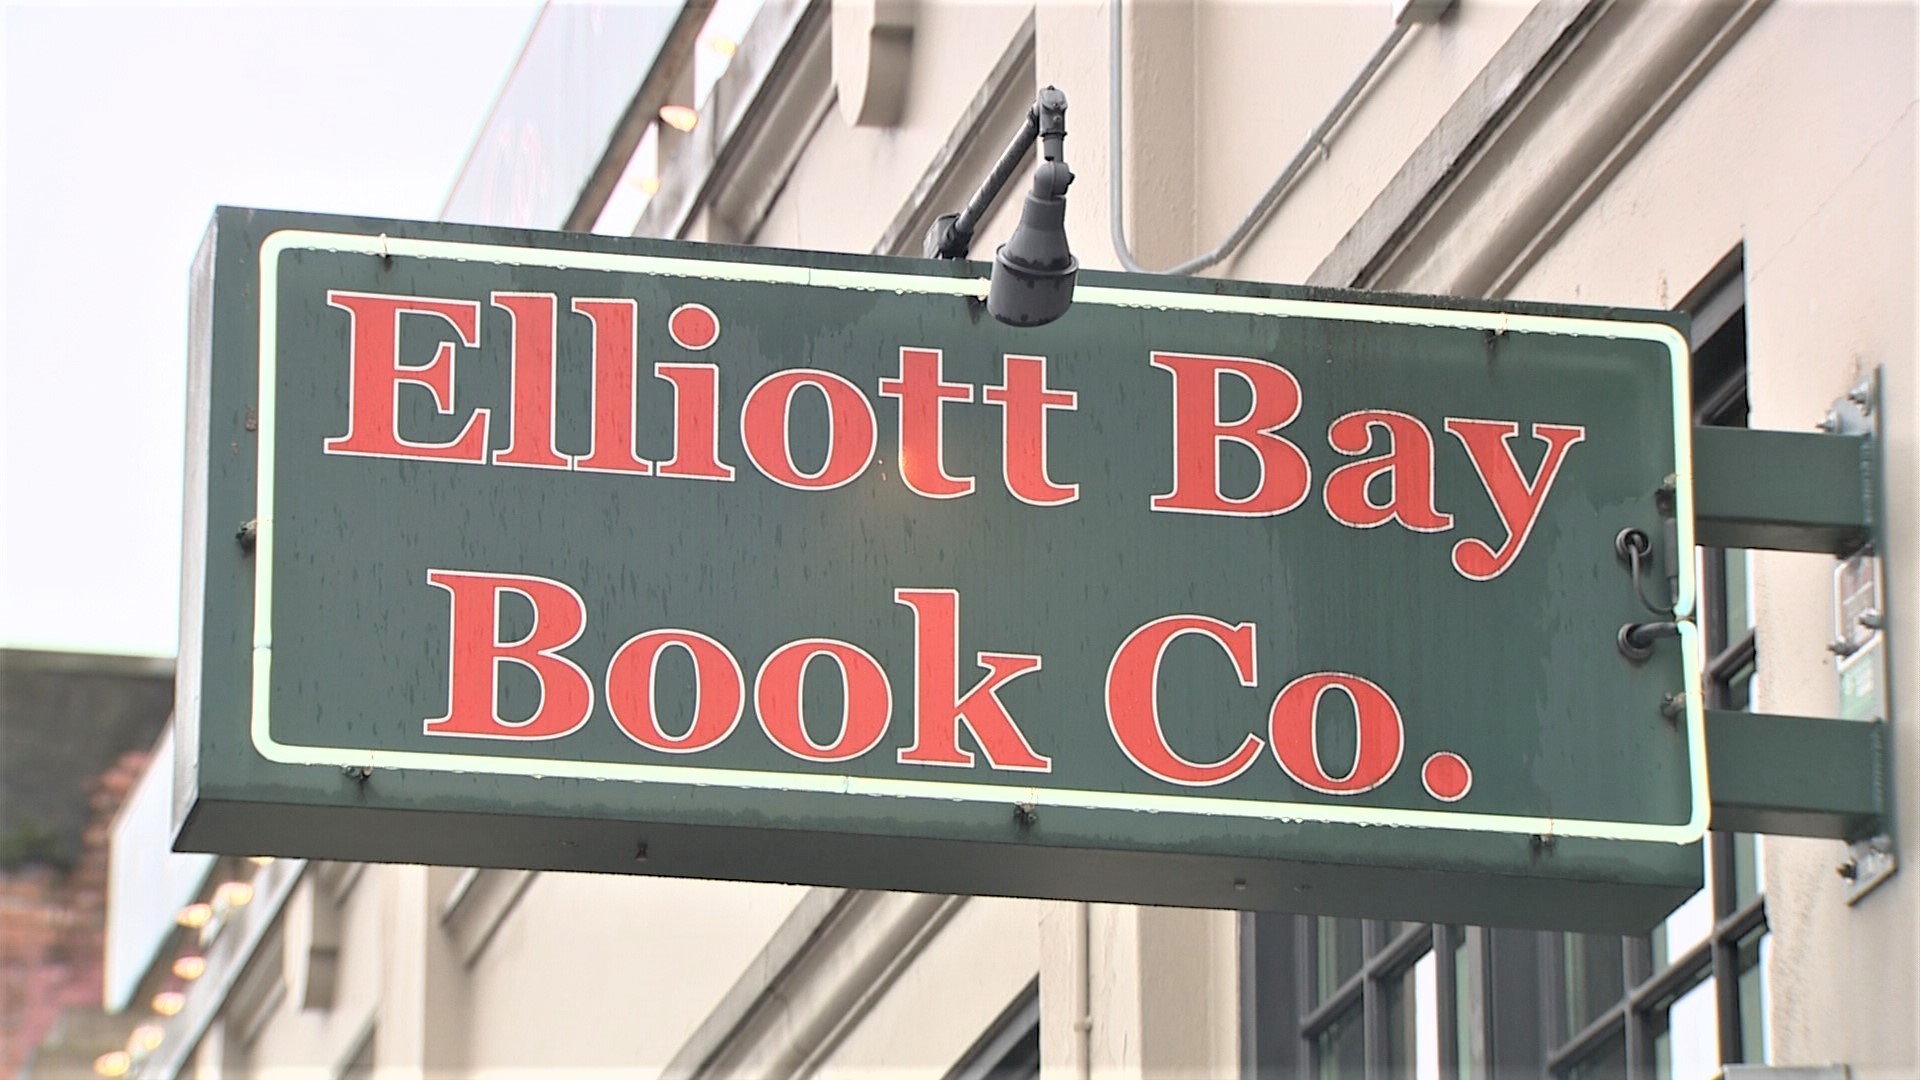 Elliott Bay Book Company opened in 1973 in Pioneer Square and was one of the first independent book stores in the country to hold author events.